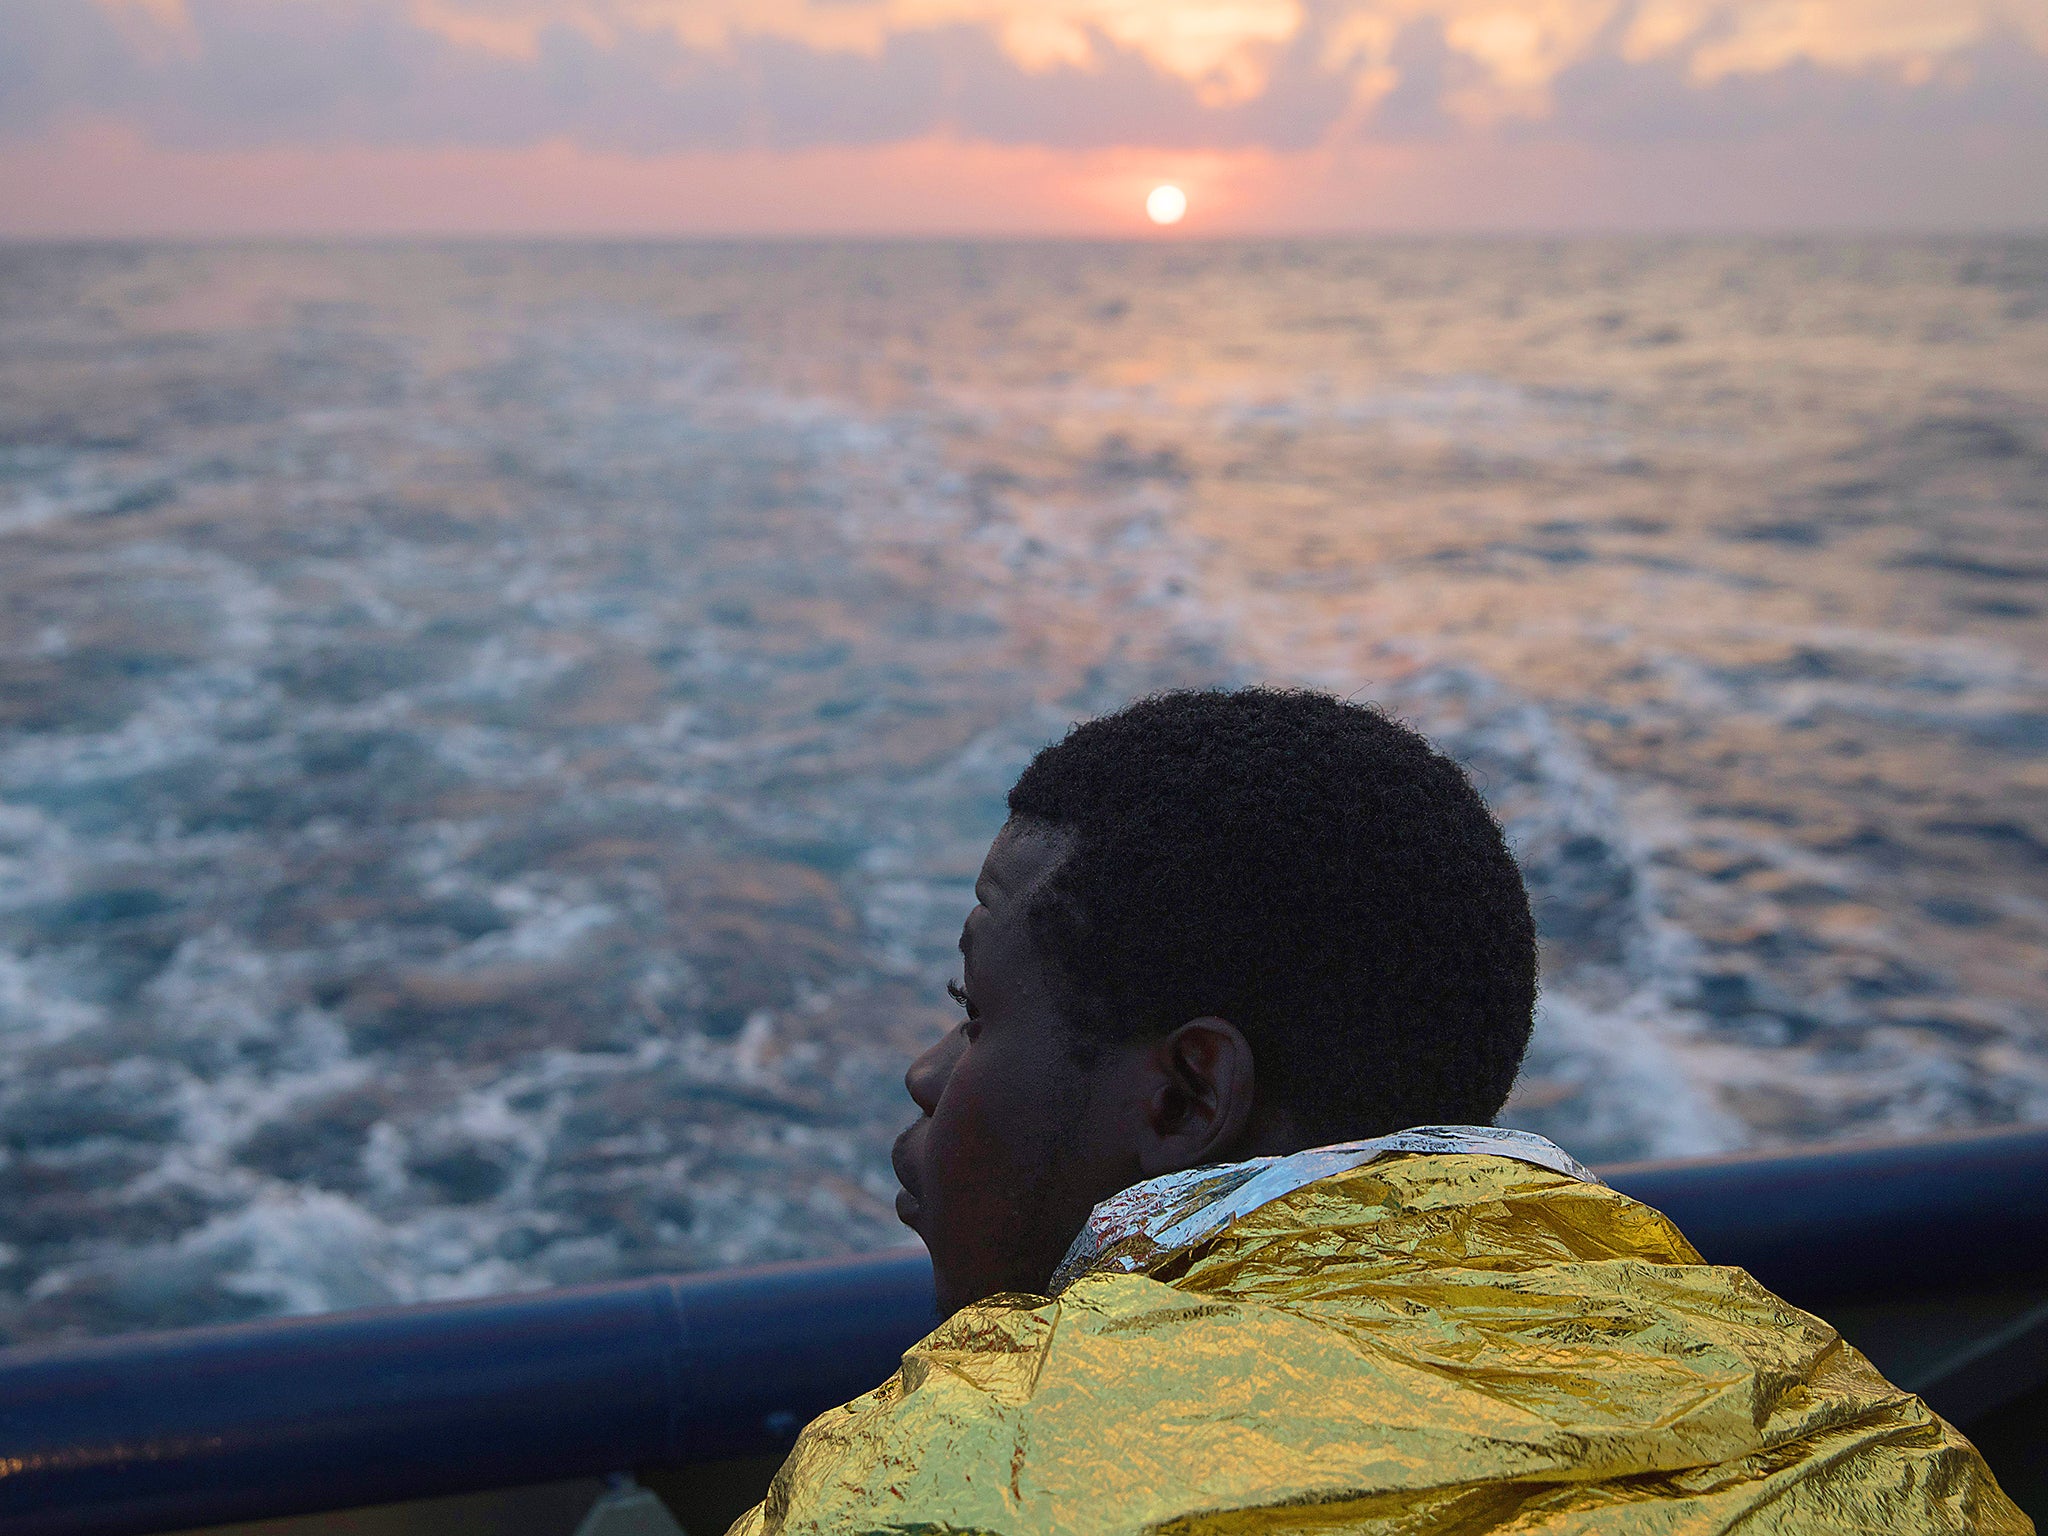 A young refugee looks across the water